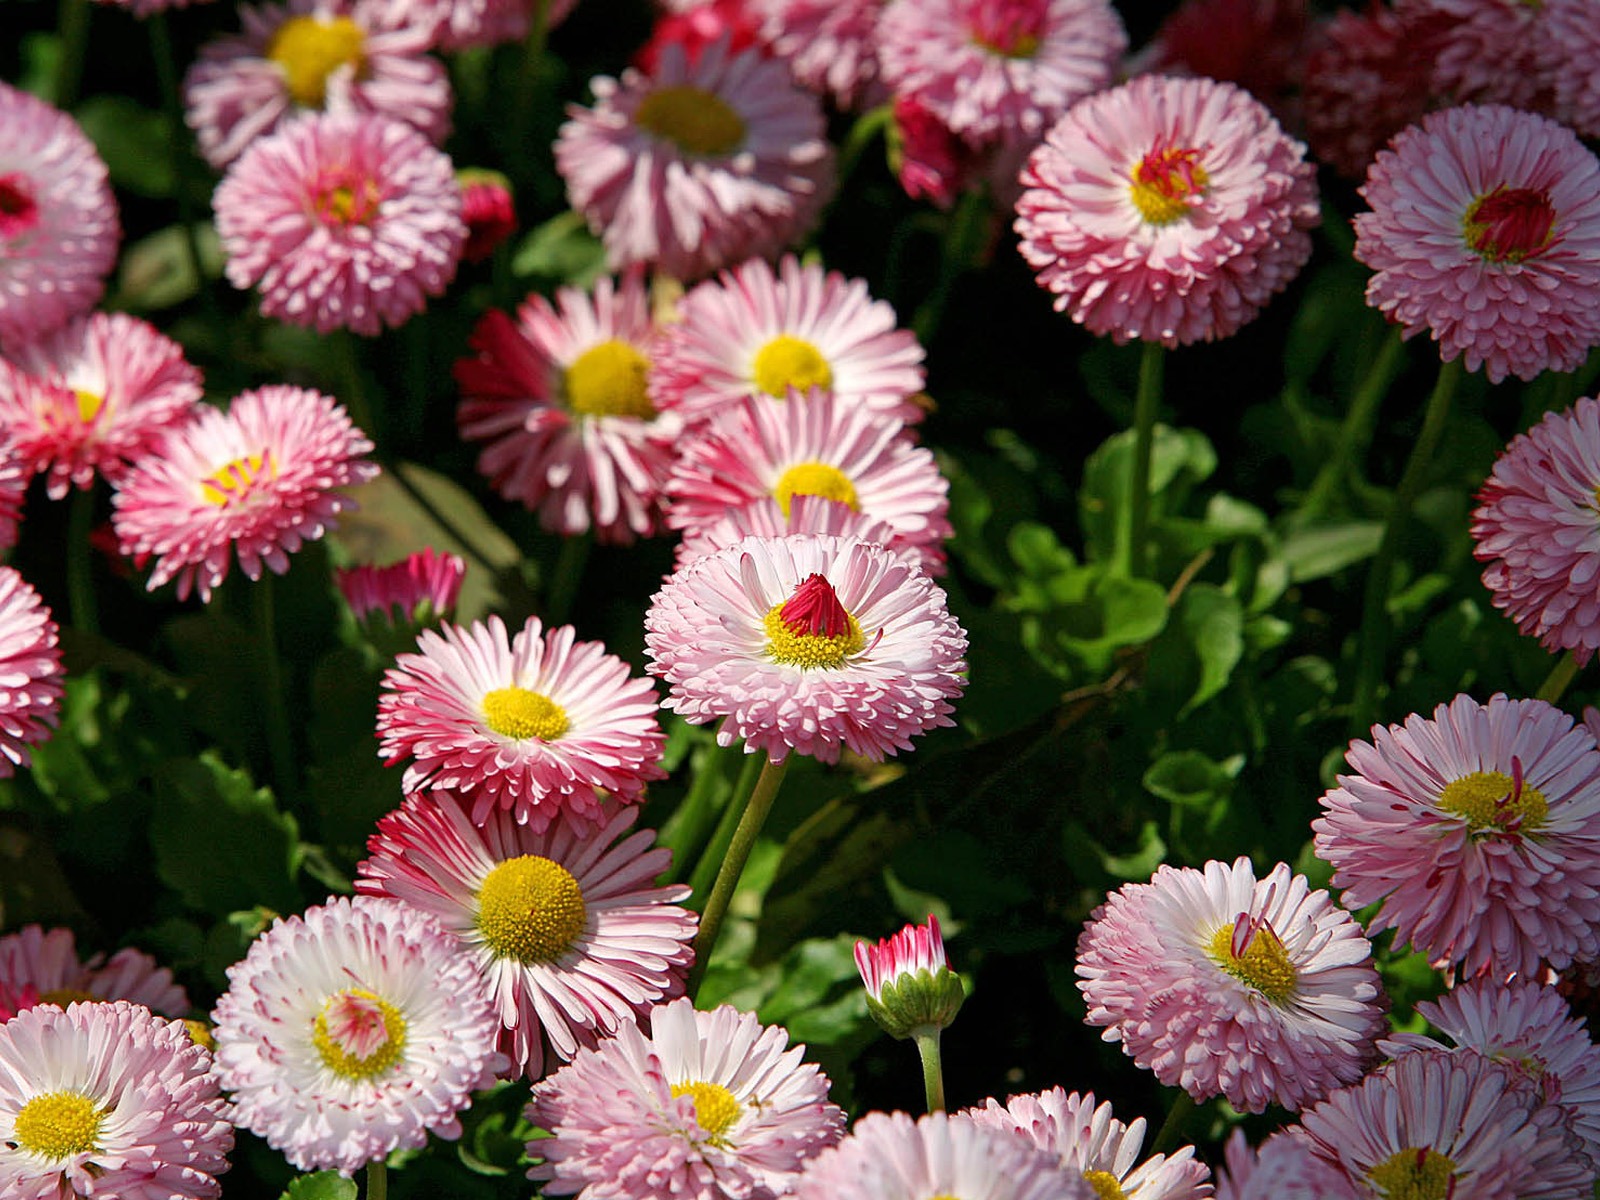 Daisies flowers close-up HD wallpapers #17 - 1600x1200